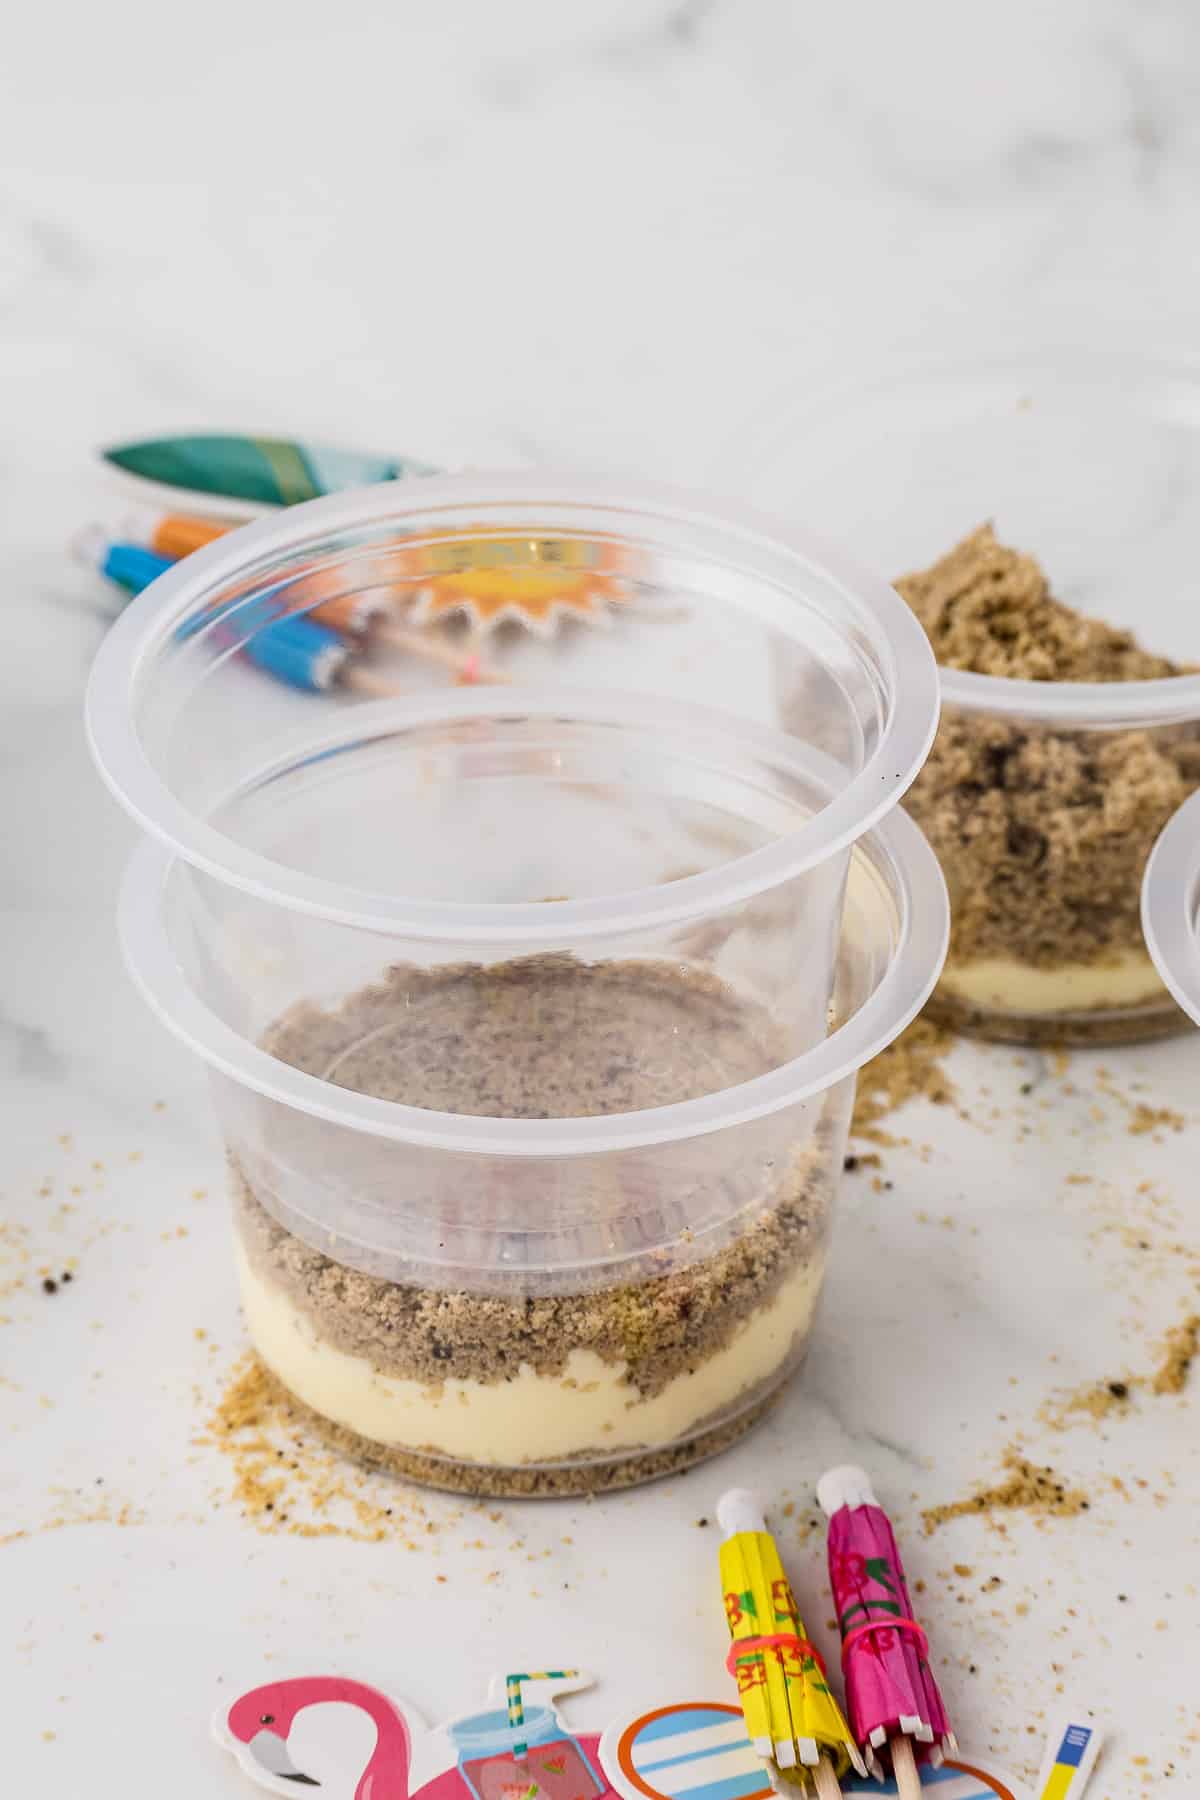 Two clear plastic cups pressed together to smash the cookie crumbs down into the pudding to make sand pail treats.